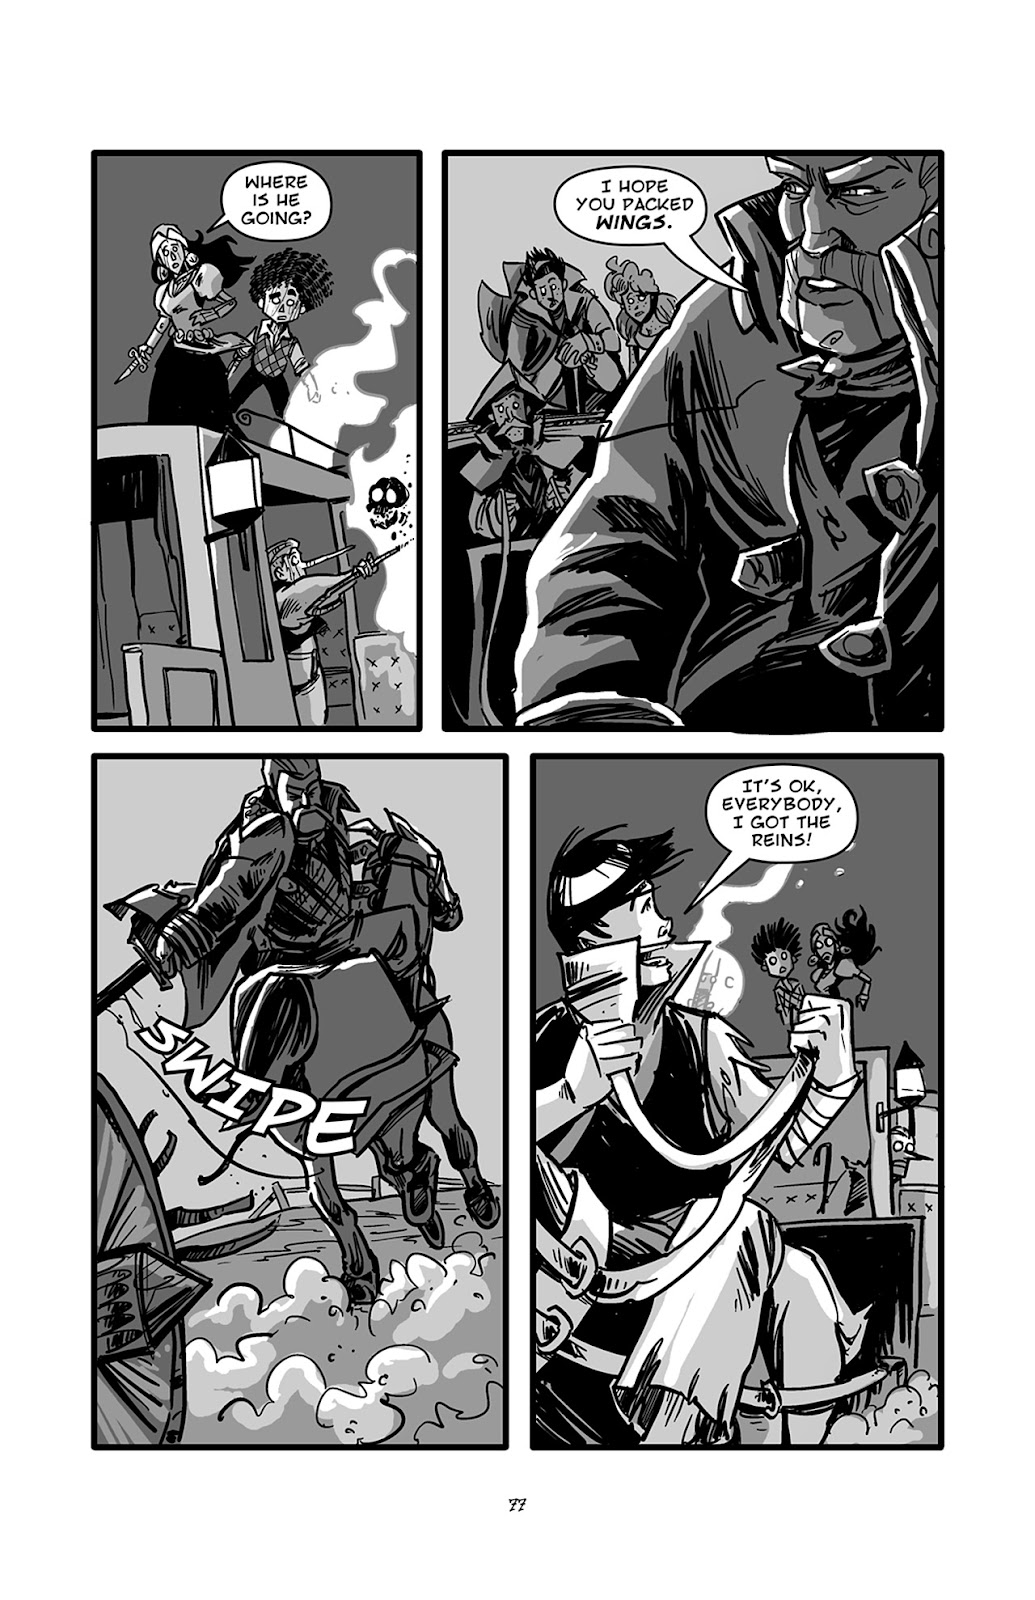 Pinocchio: Vampire Slayer - Of Wood and Blood issue 4 - Page 4